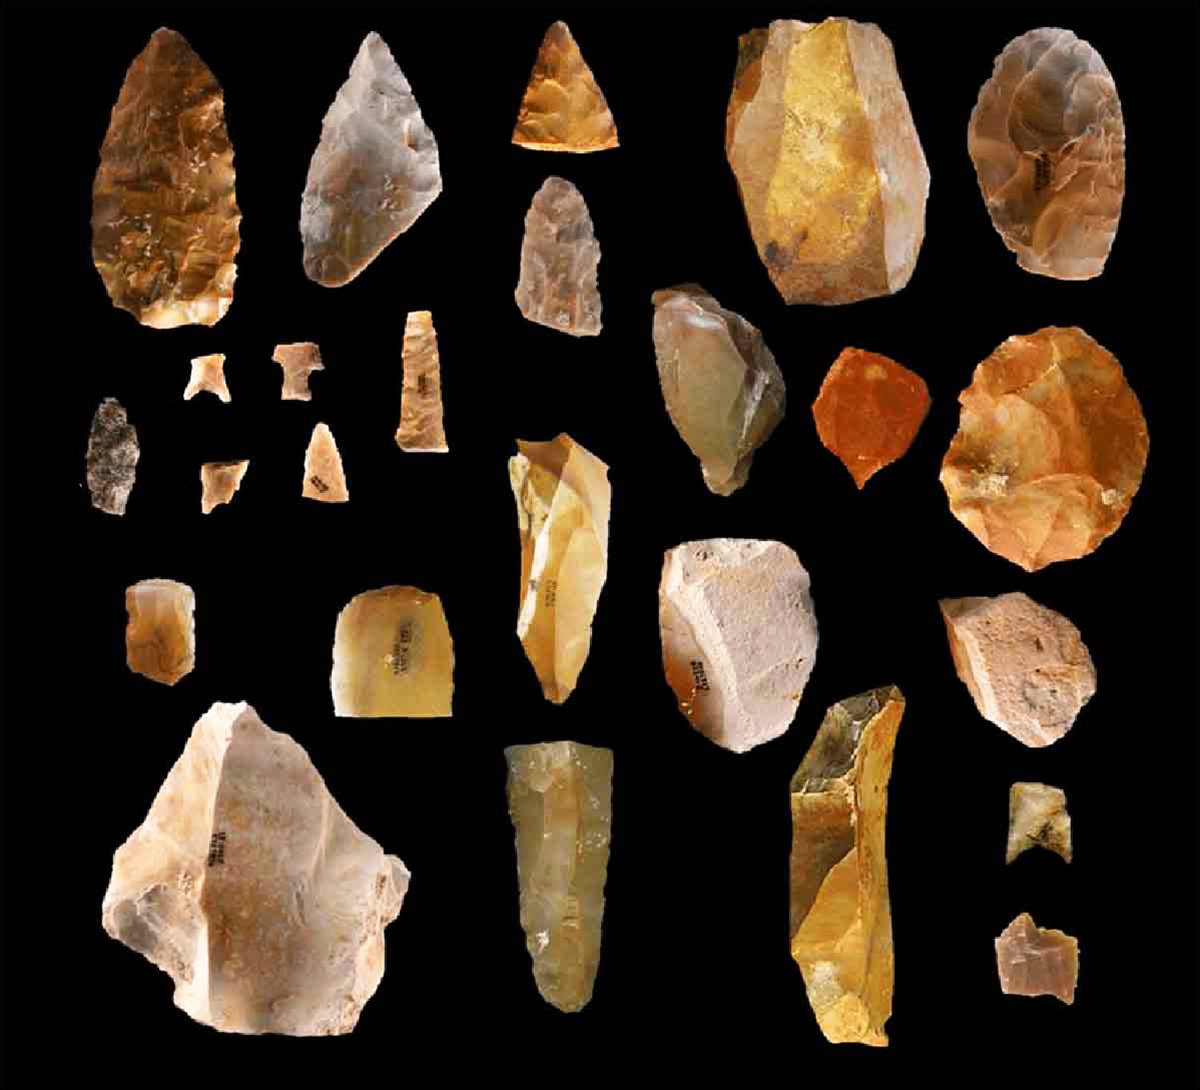 Assortment of stone tools from the Gault site, Texas, including bifaces, blade cores, quartz and lanceolate projectile points, unifacial tools, gravers, discoidal bifaces, end scrapers, and modified flake tools.